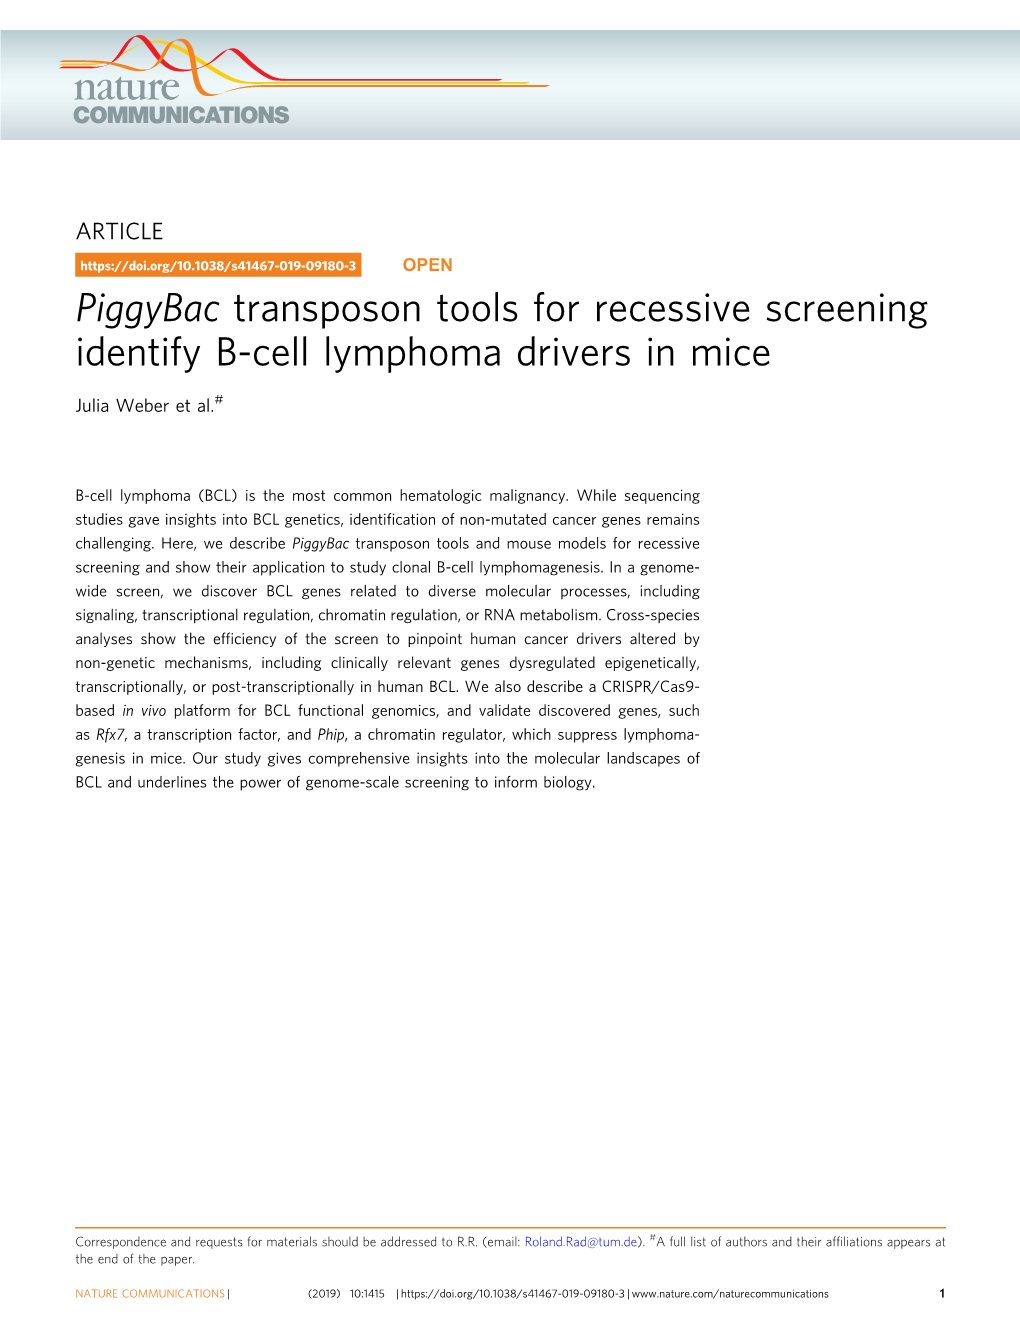 Piggybac Transposon Tools for Recessive Screening Identify B-Cell Lymphoma Drivers in Mice